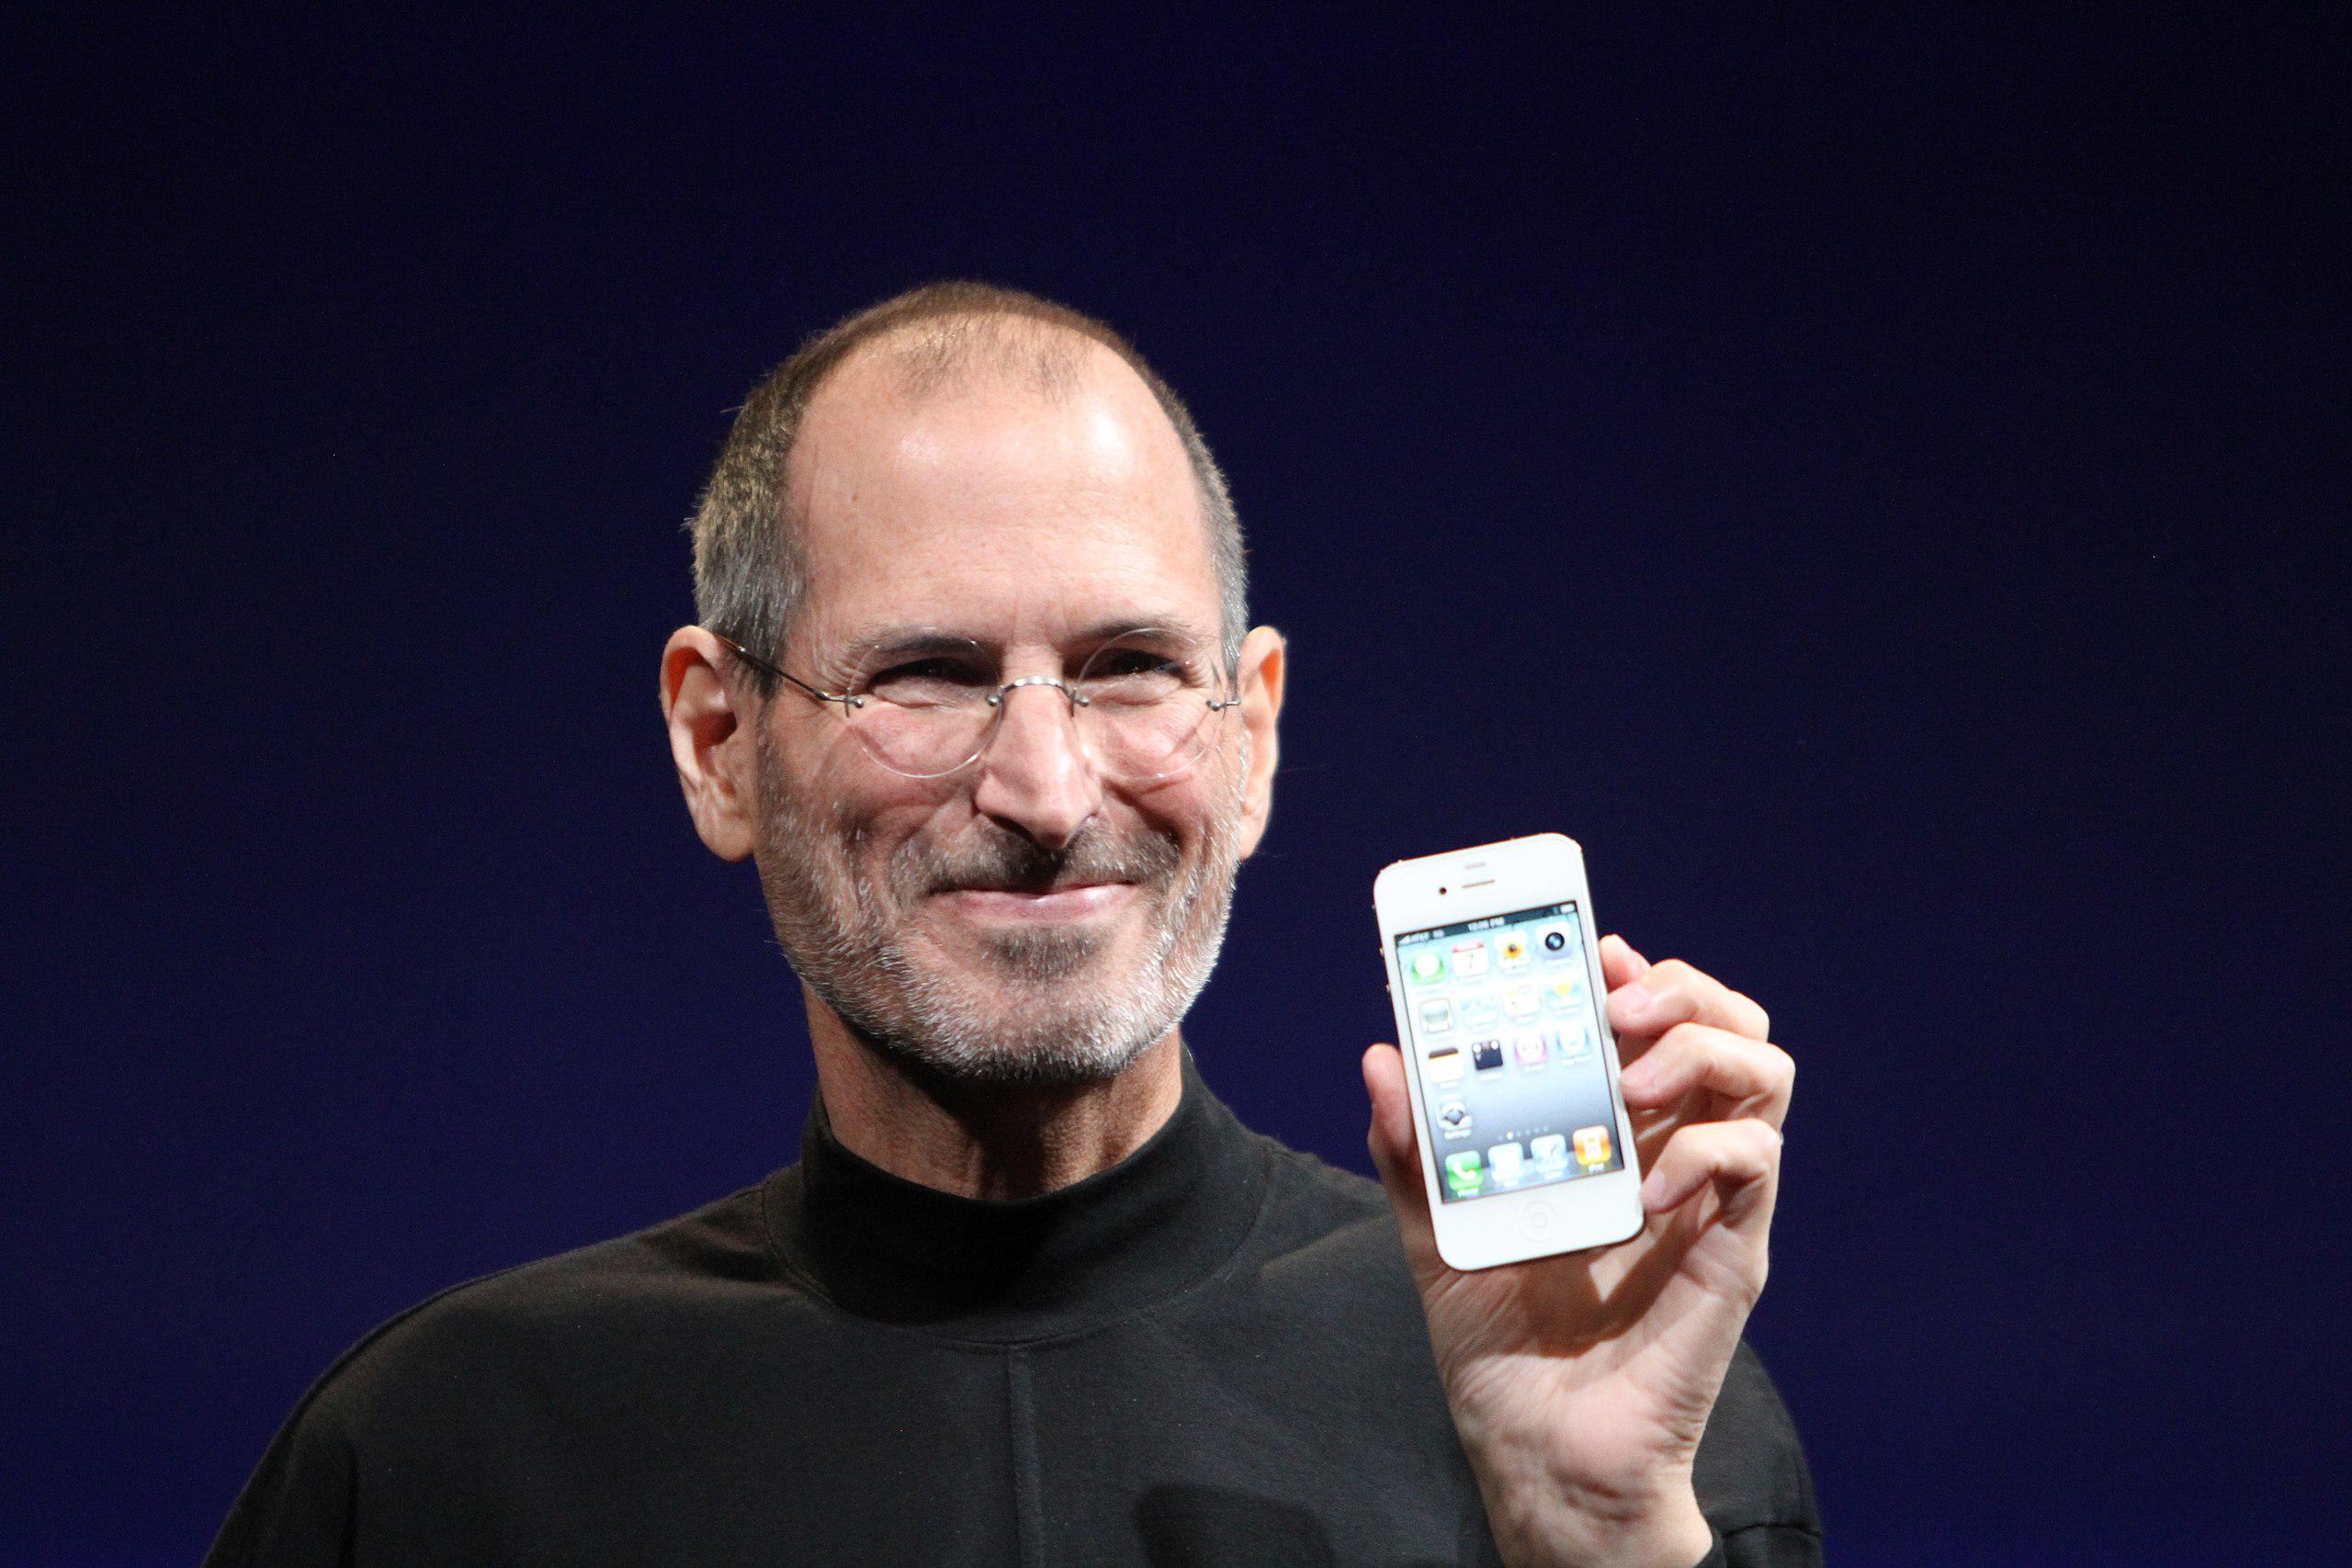 Steve Jobs during the iPhone 4 presentation in 2010.